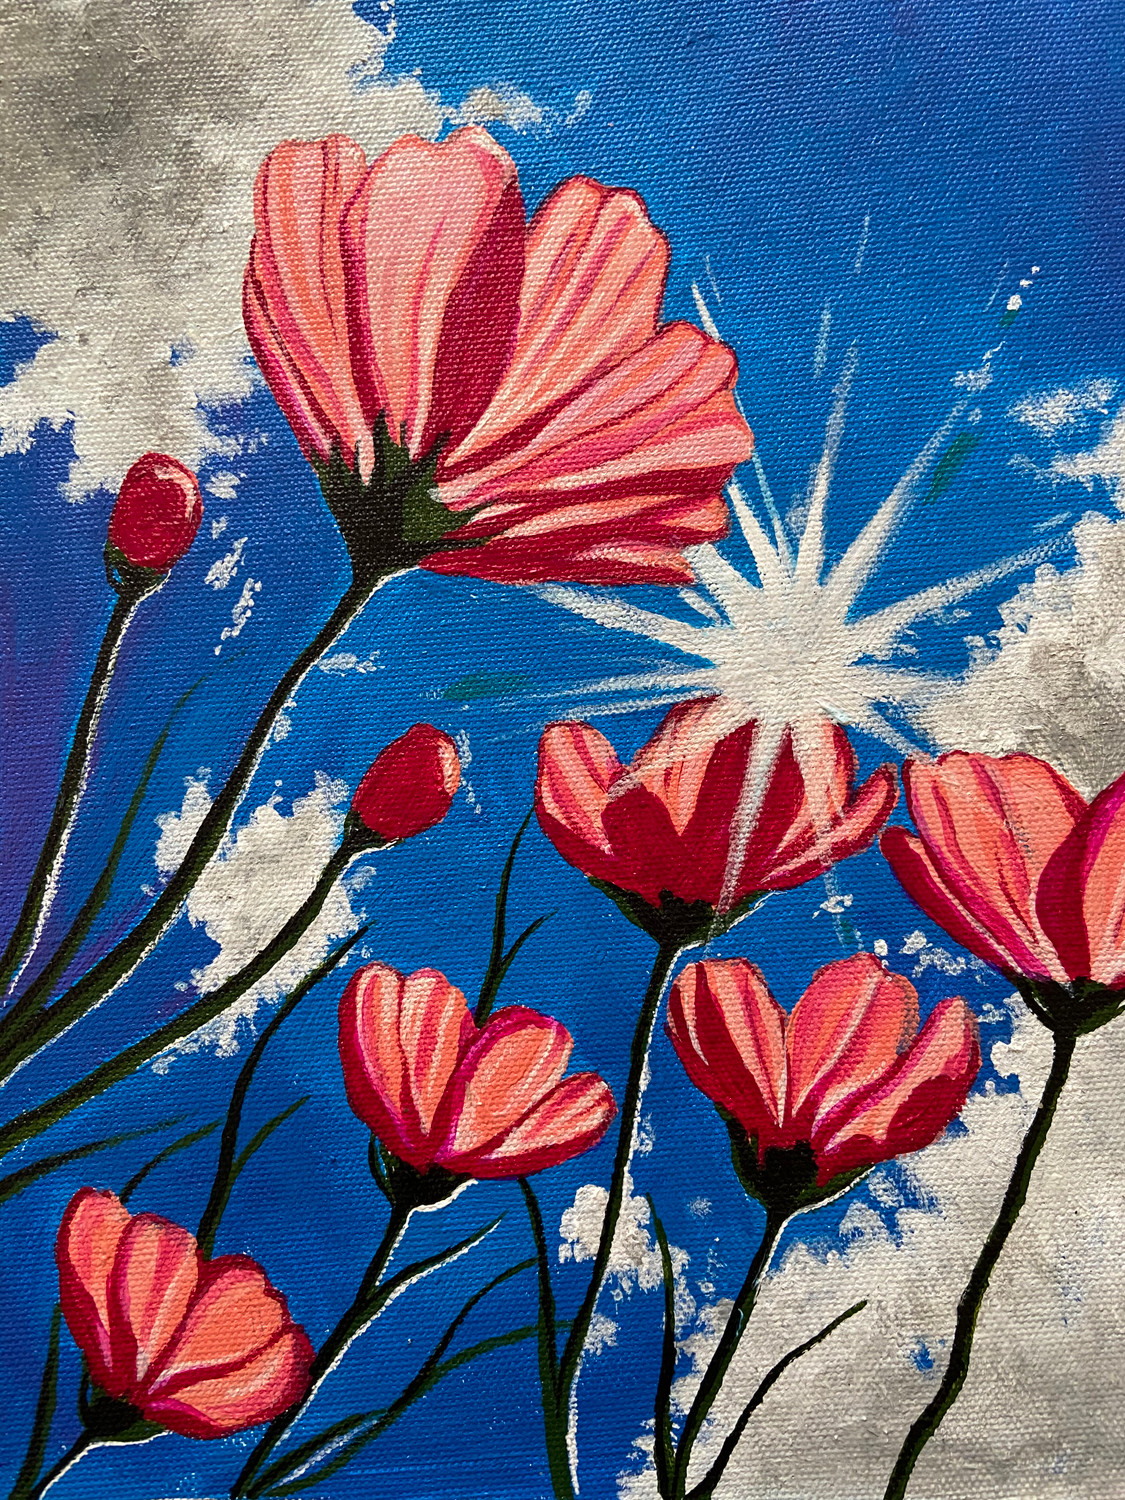 Buy Spring Flowers- acrylic painting Handmade Painting by SHREYASHI DAS.  Code:ART_7283_55701 - Paintings for Sale online in India.